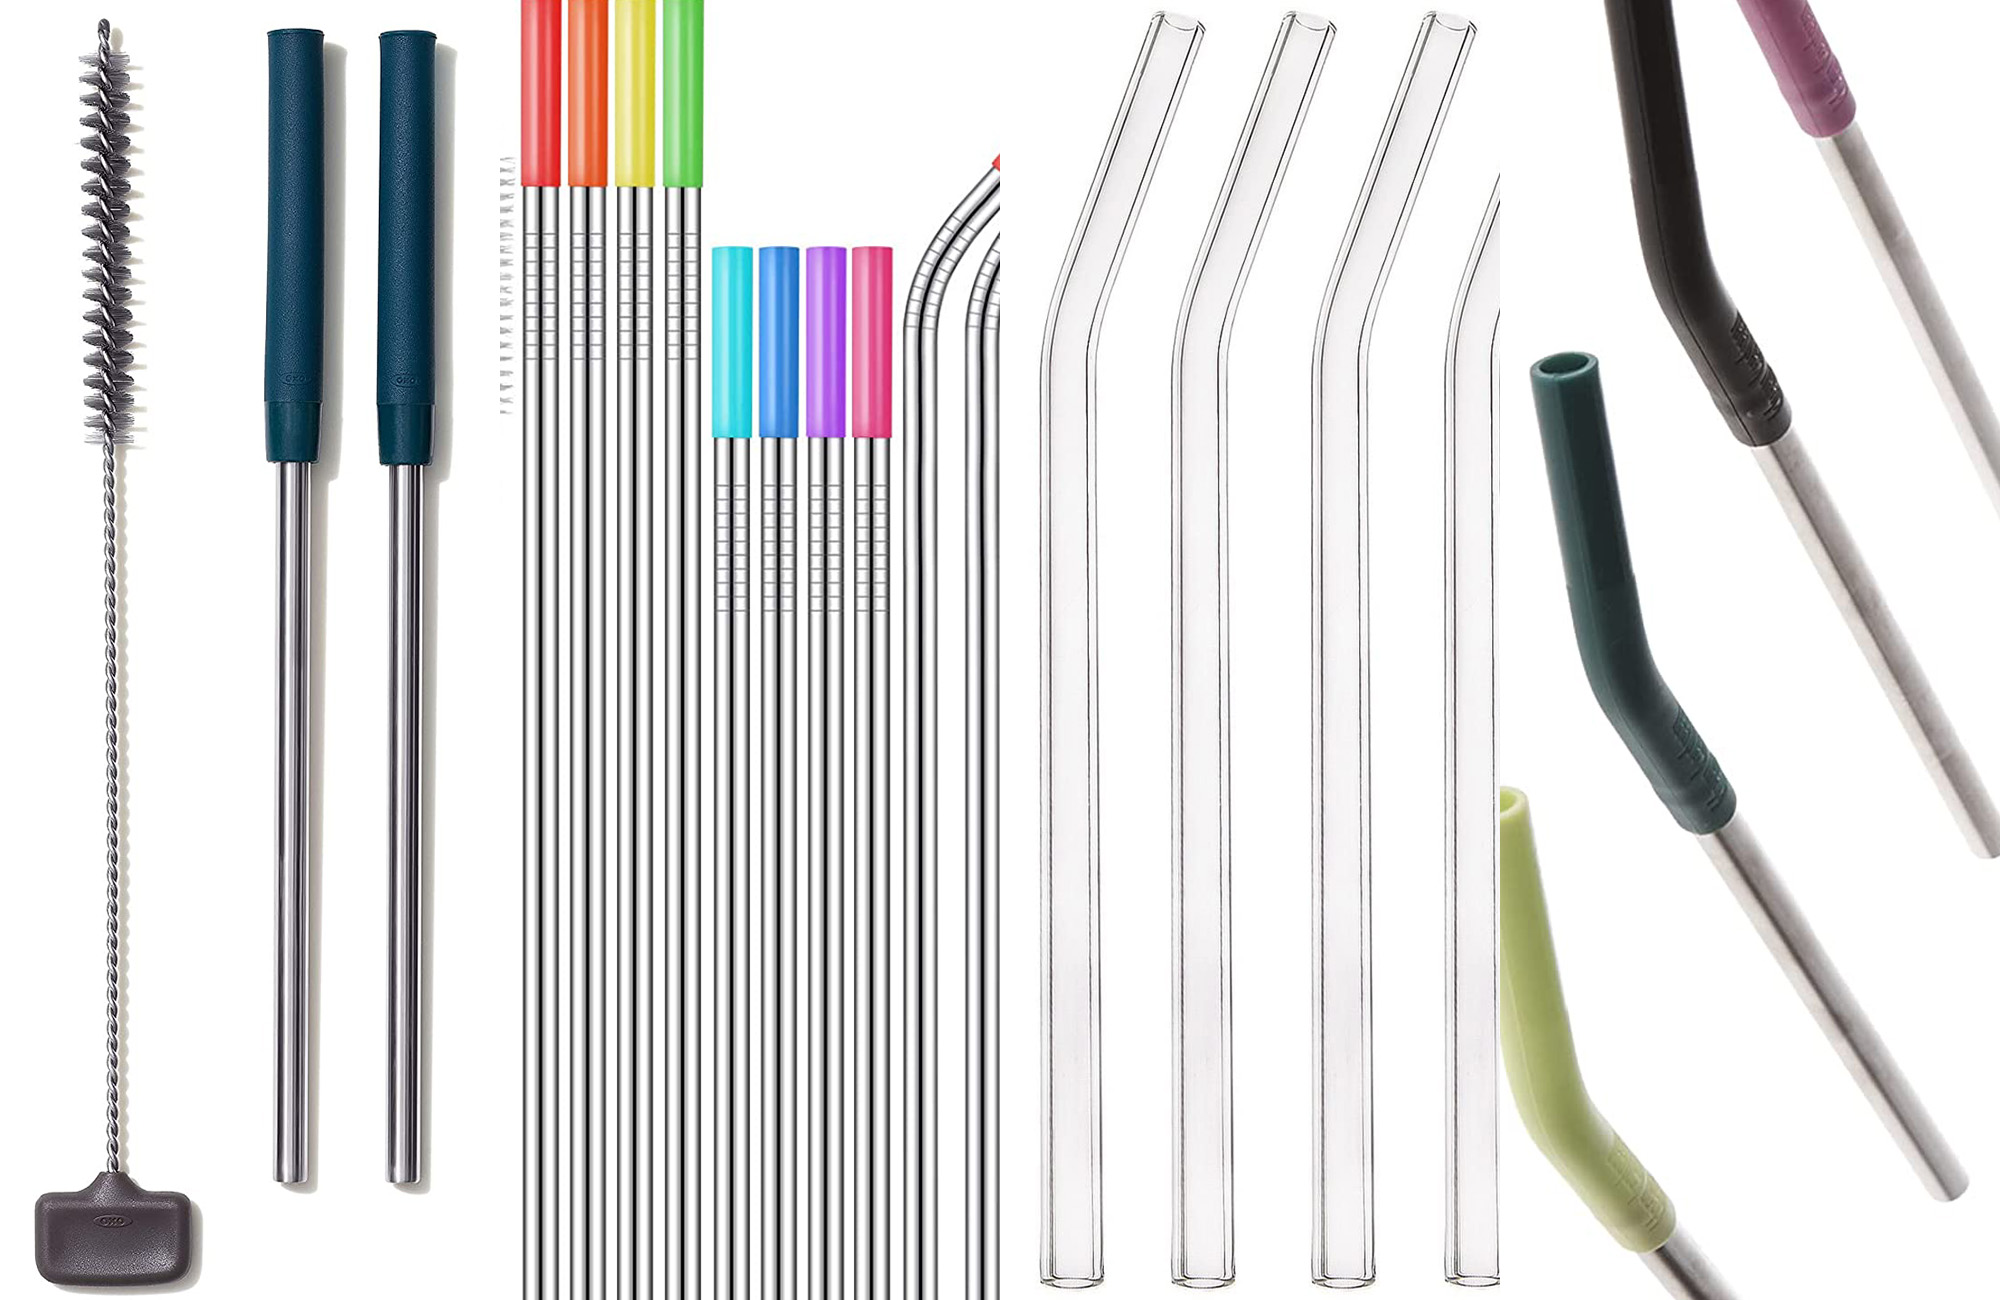 Glass Straws Clear 9 Inches X 10 Mm Drinking Straws Reusable Straws Healthy  Eco